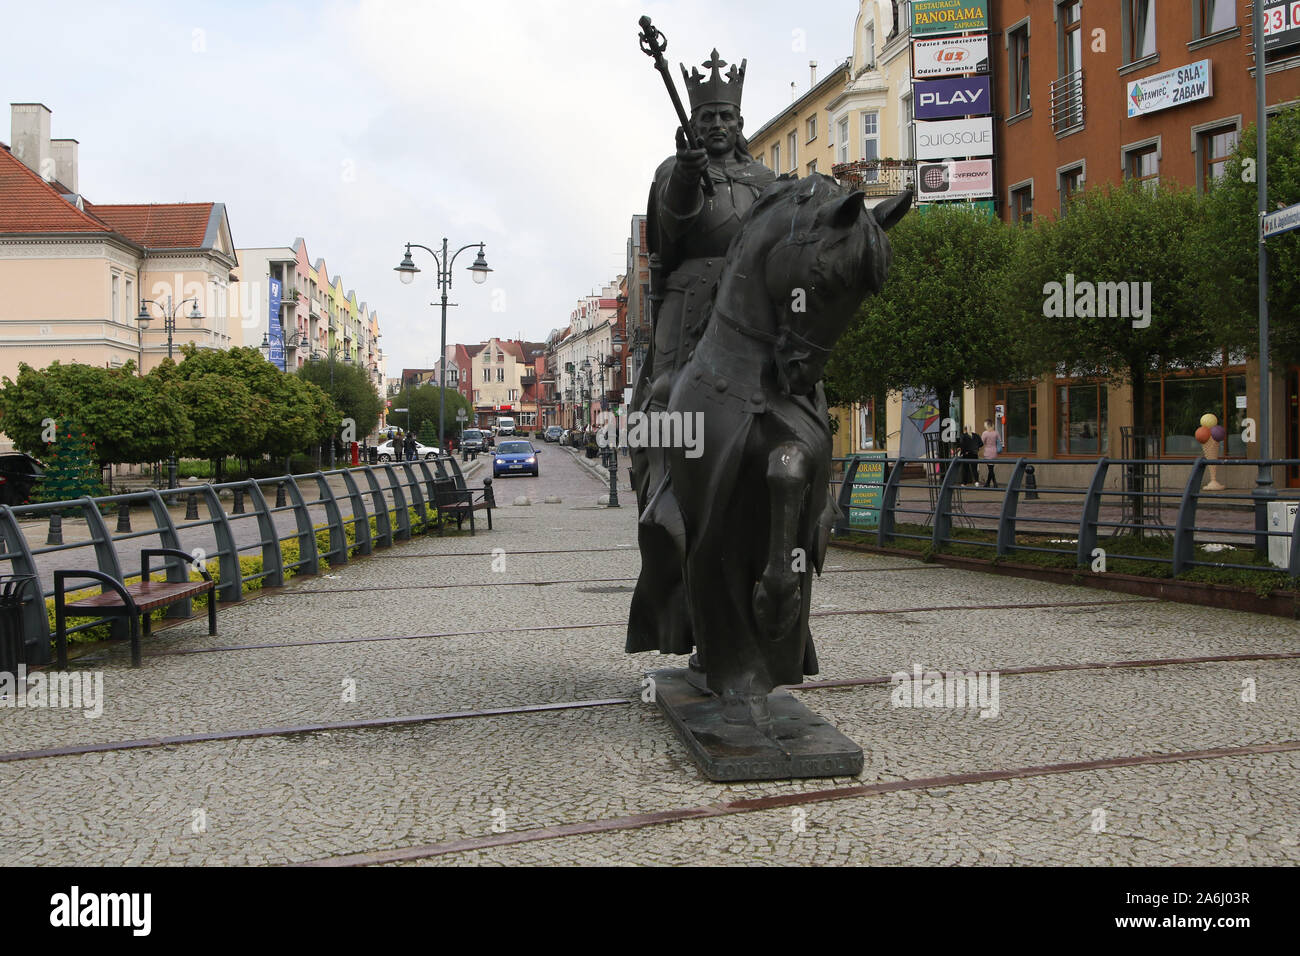 The Casimir IV Jagiellon (Kazimierz Jagiellonczyk) monument is seen in the centre city of Malbork, Poland, on 18 May 2019  © Michal Fludra / Alamy Live News Stock Photo